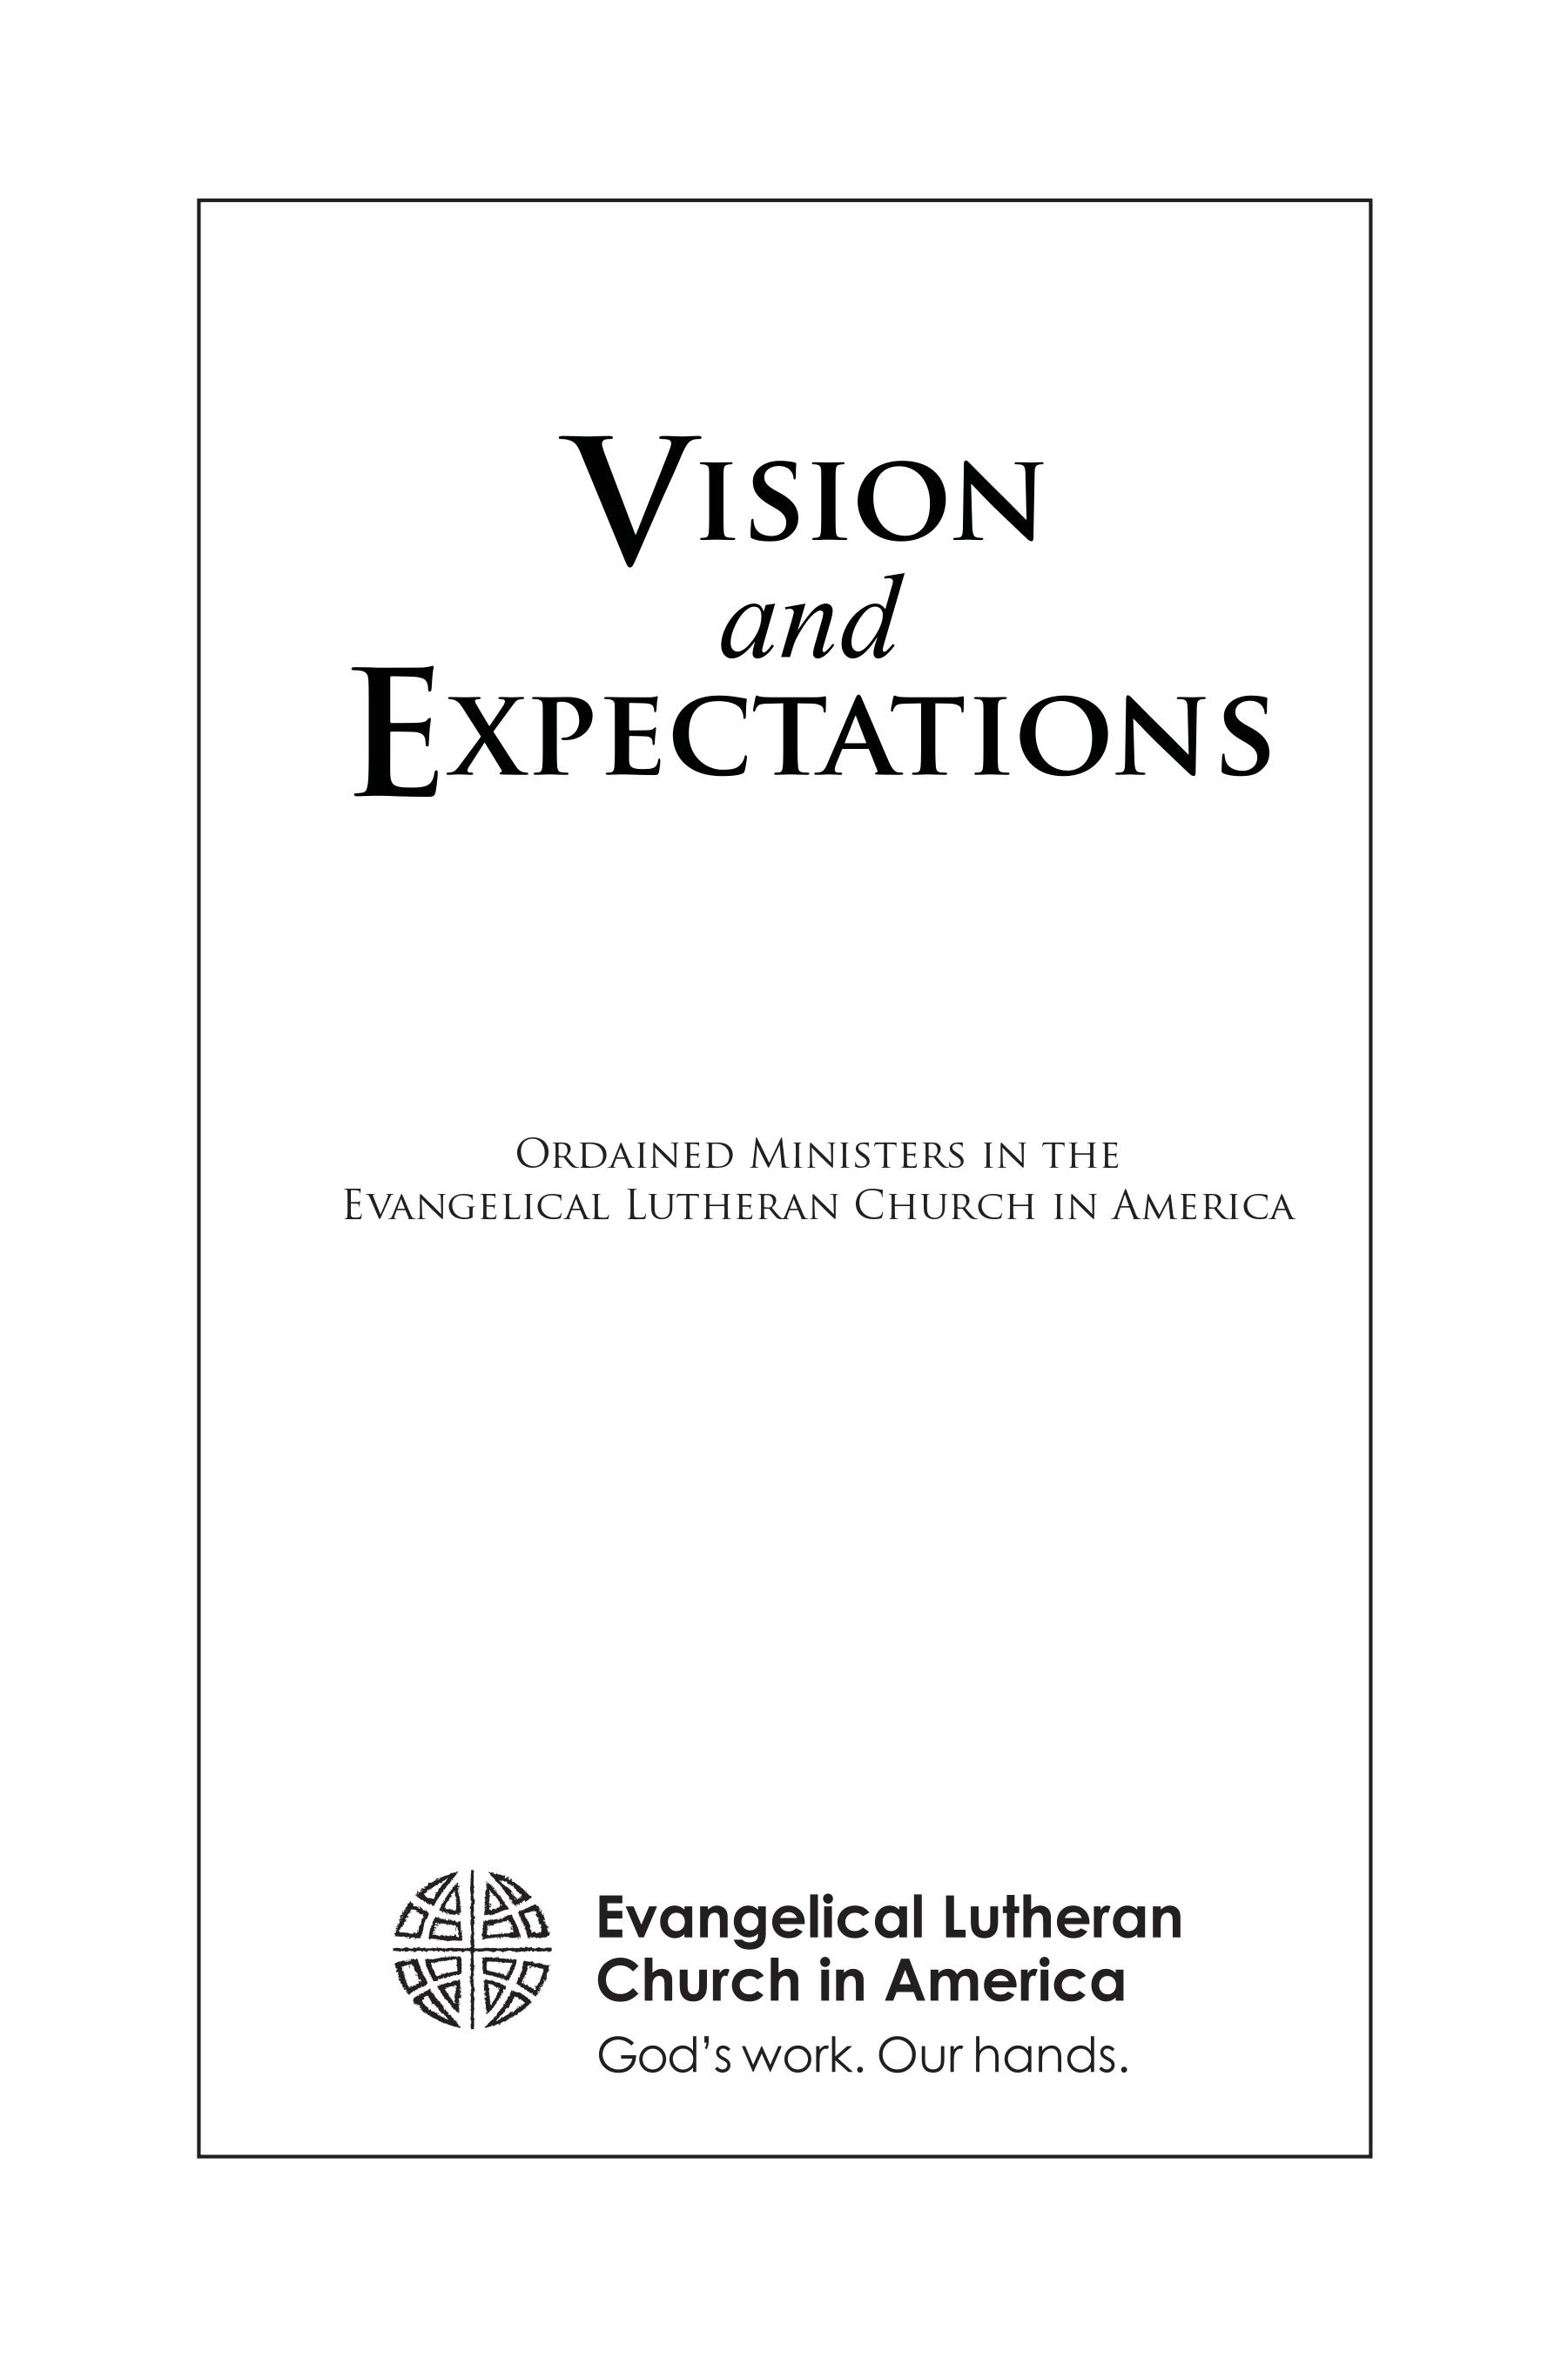 Vision and Expectations for Ordained Ministers